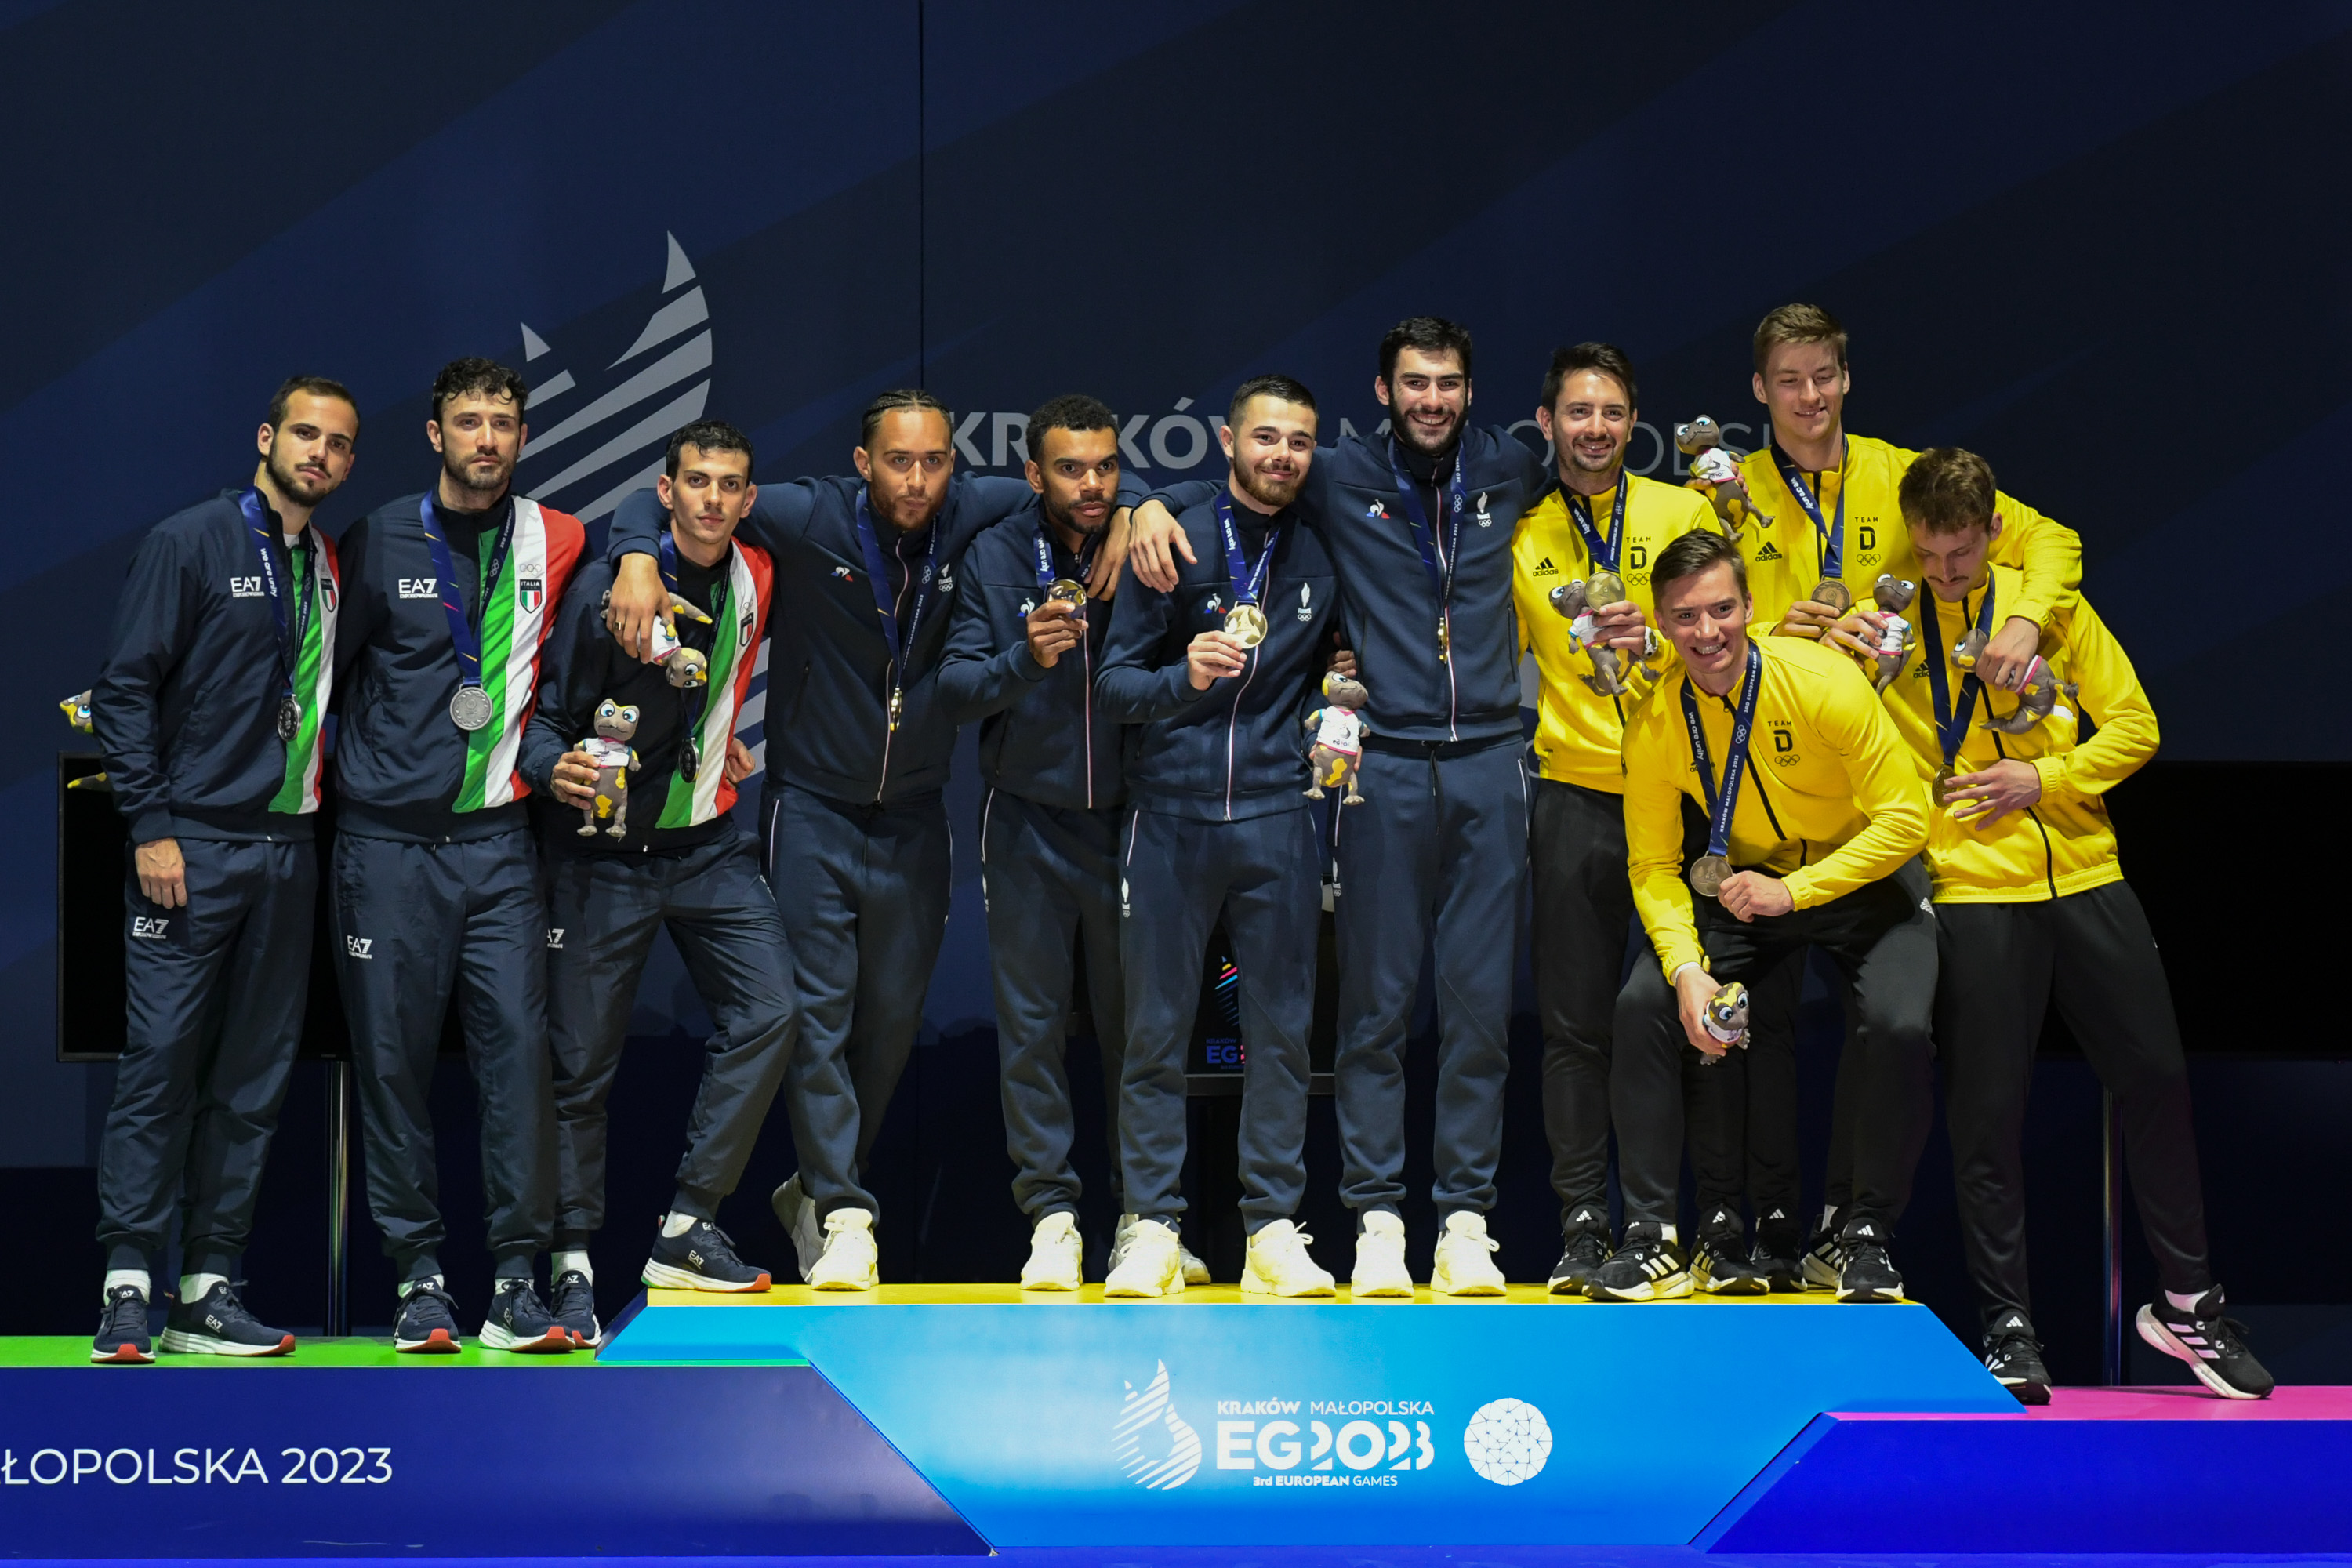 French gold in men’s team sabre competition